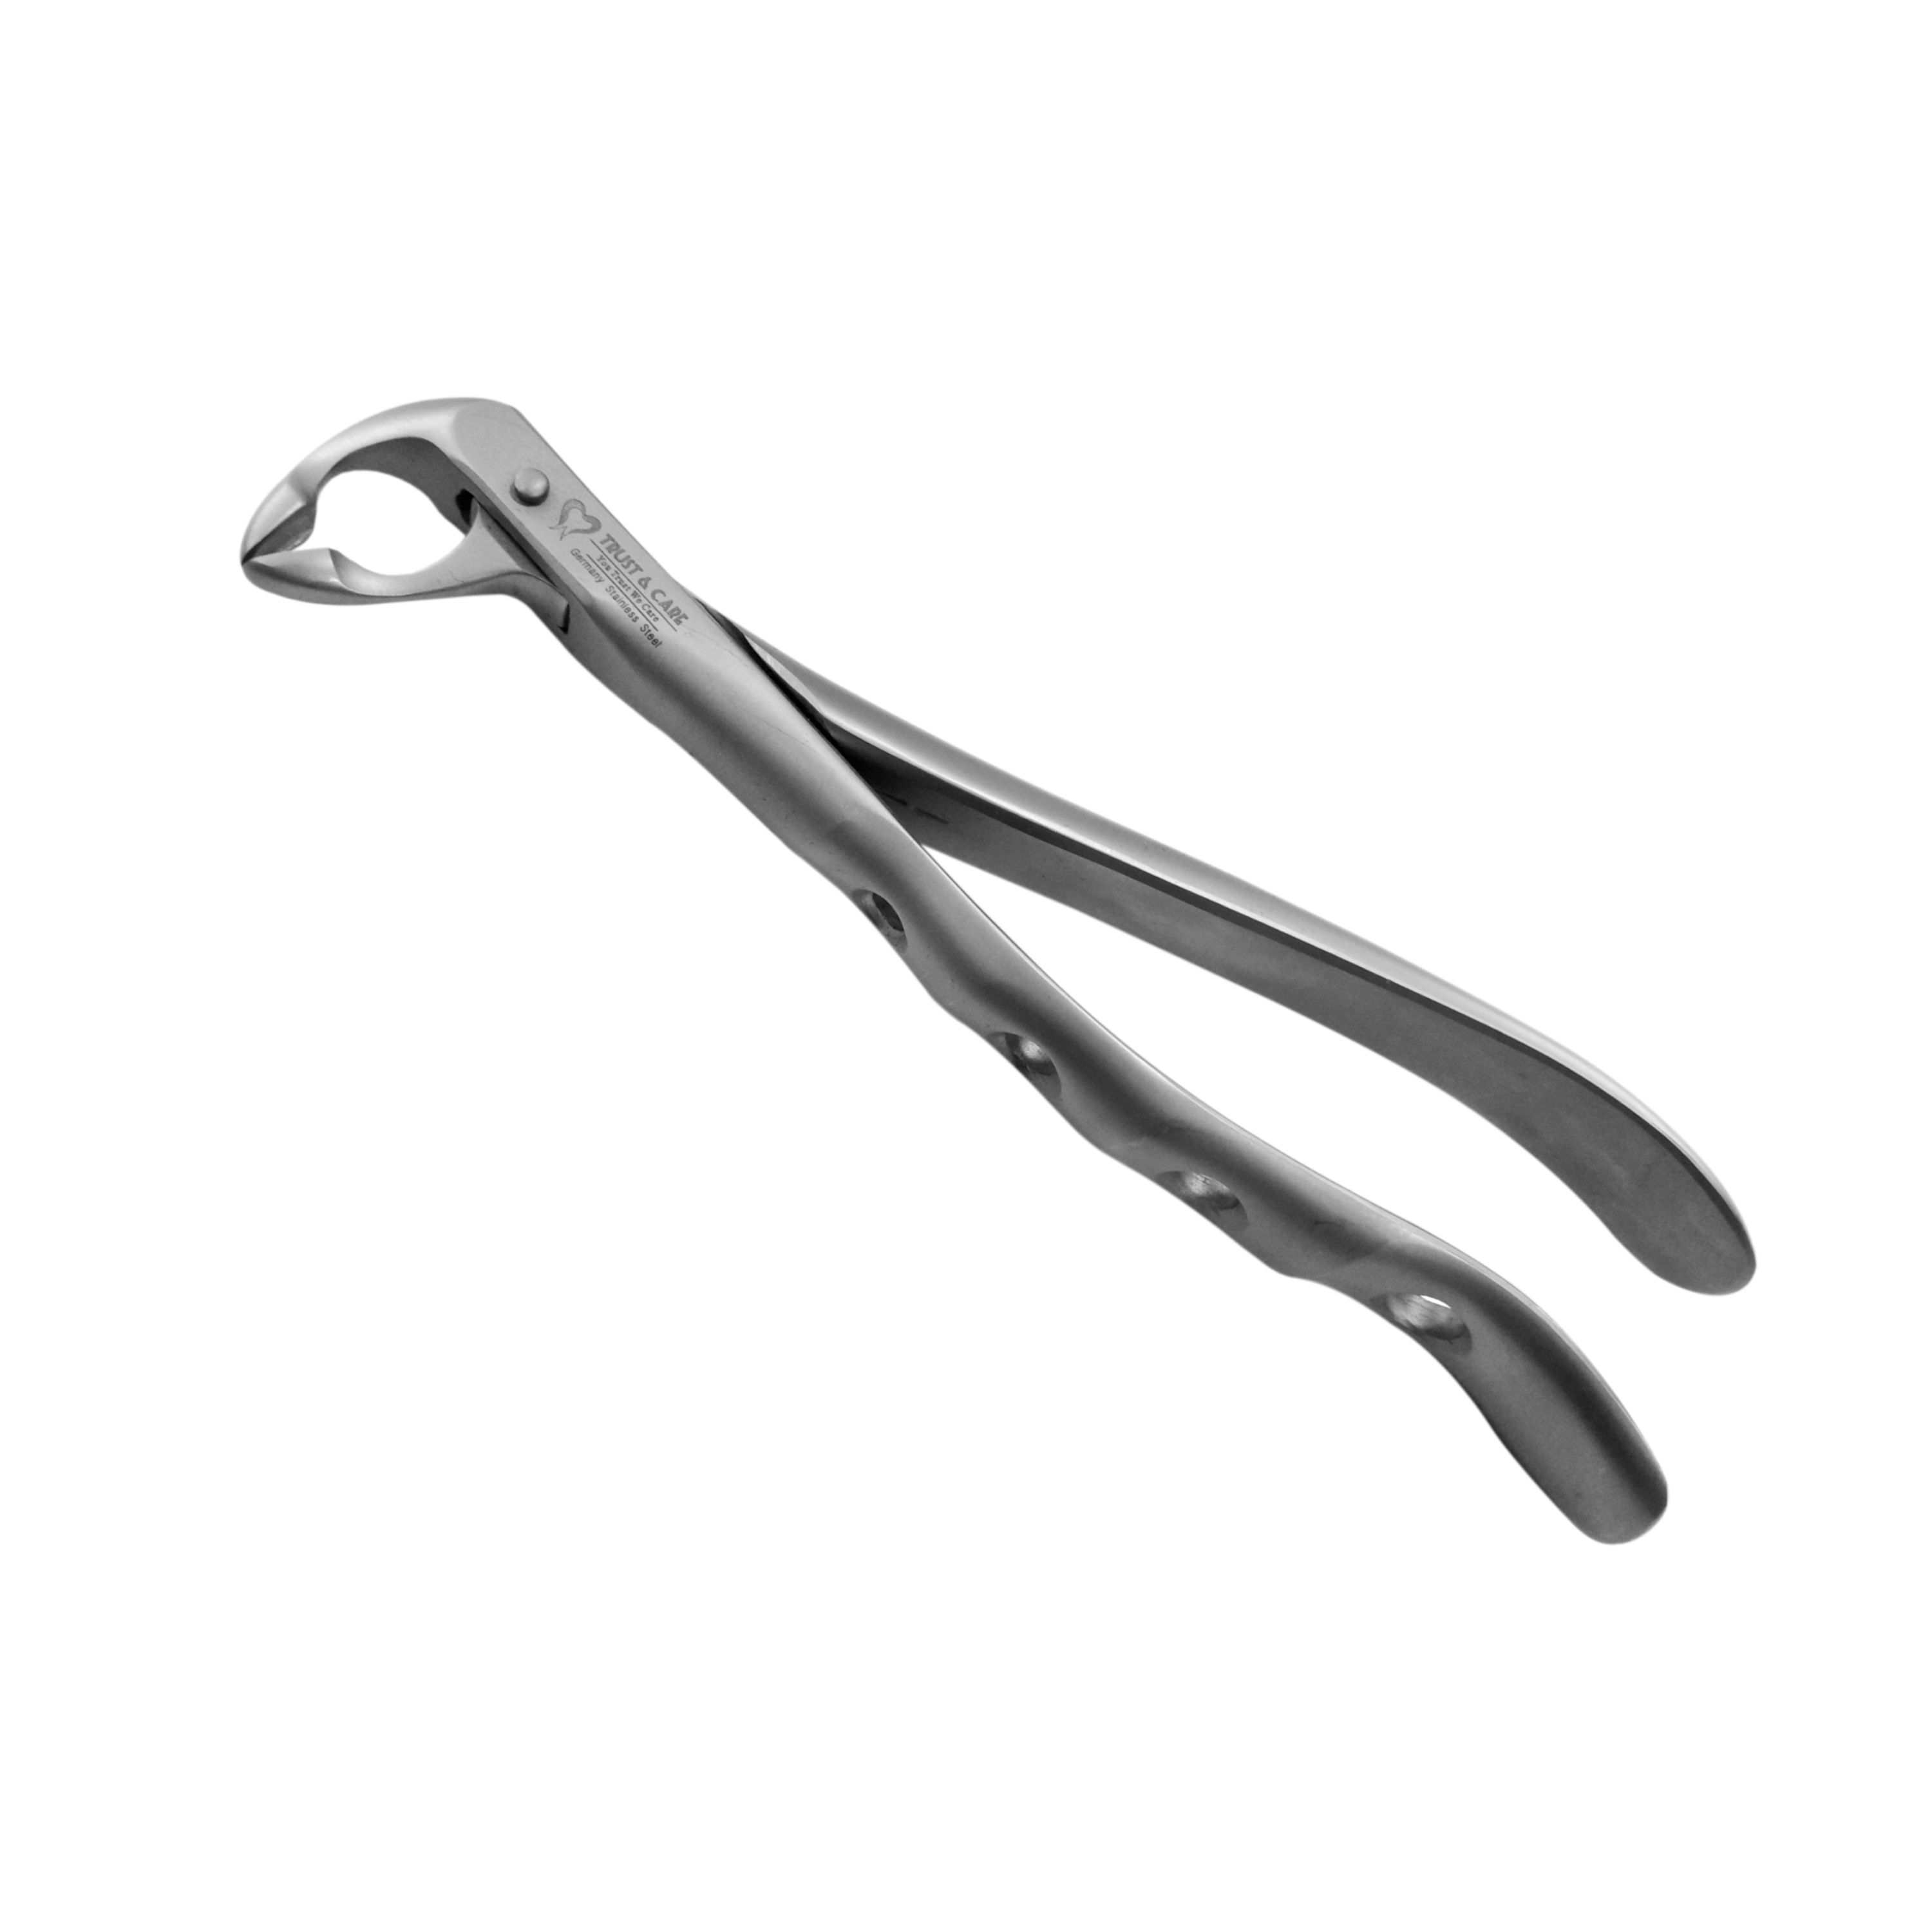 Trust & Care Secure Forcep Lower Roots Fig No. 974.00